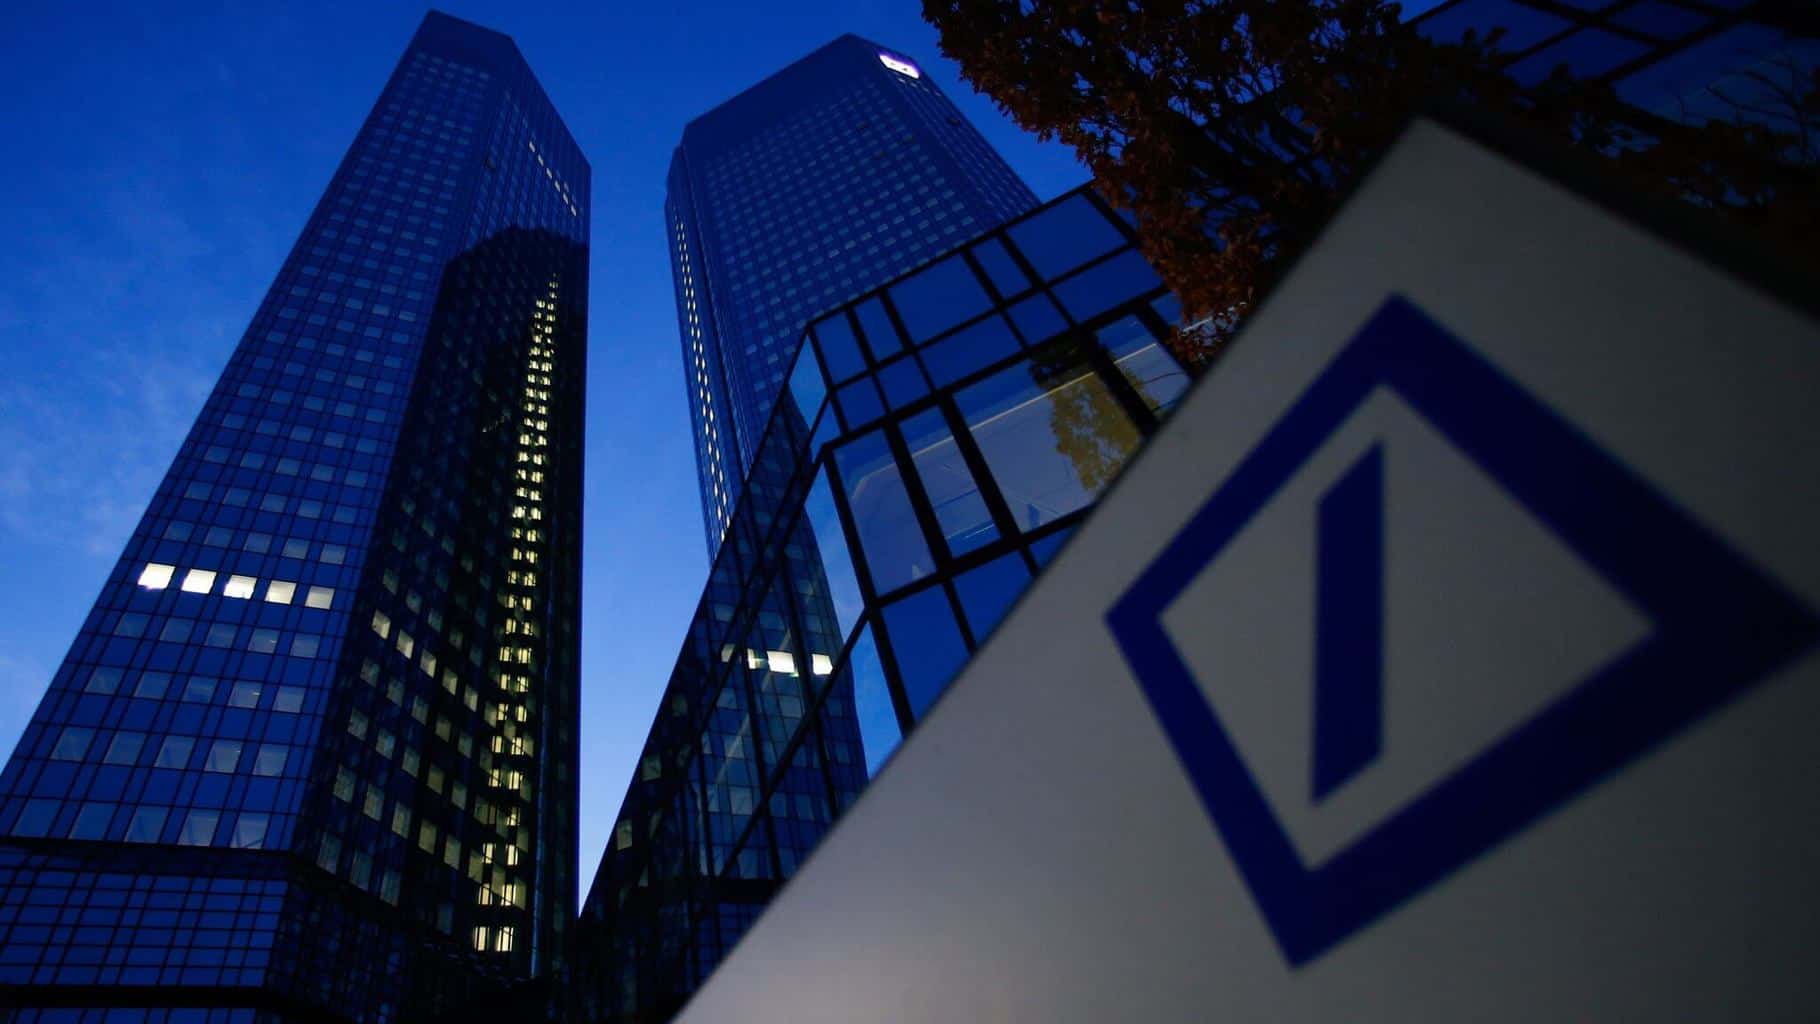 About 800 Deutsche Bank Employees Will Shift to BNP under a New Prime Brokerage Deal